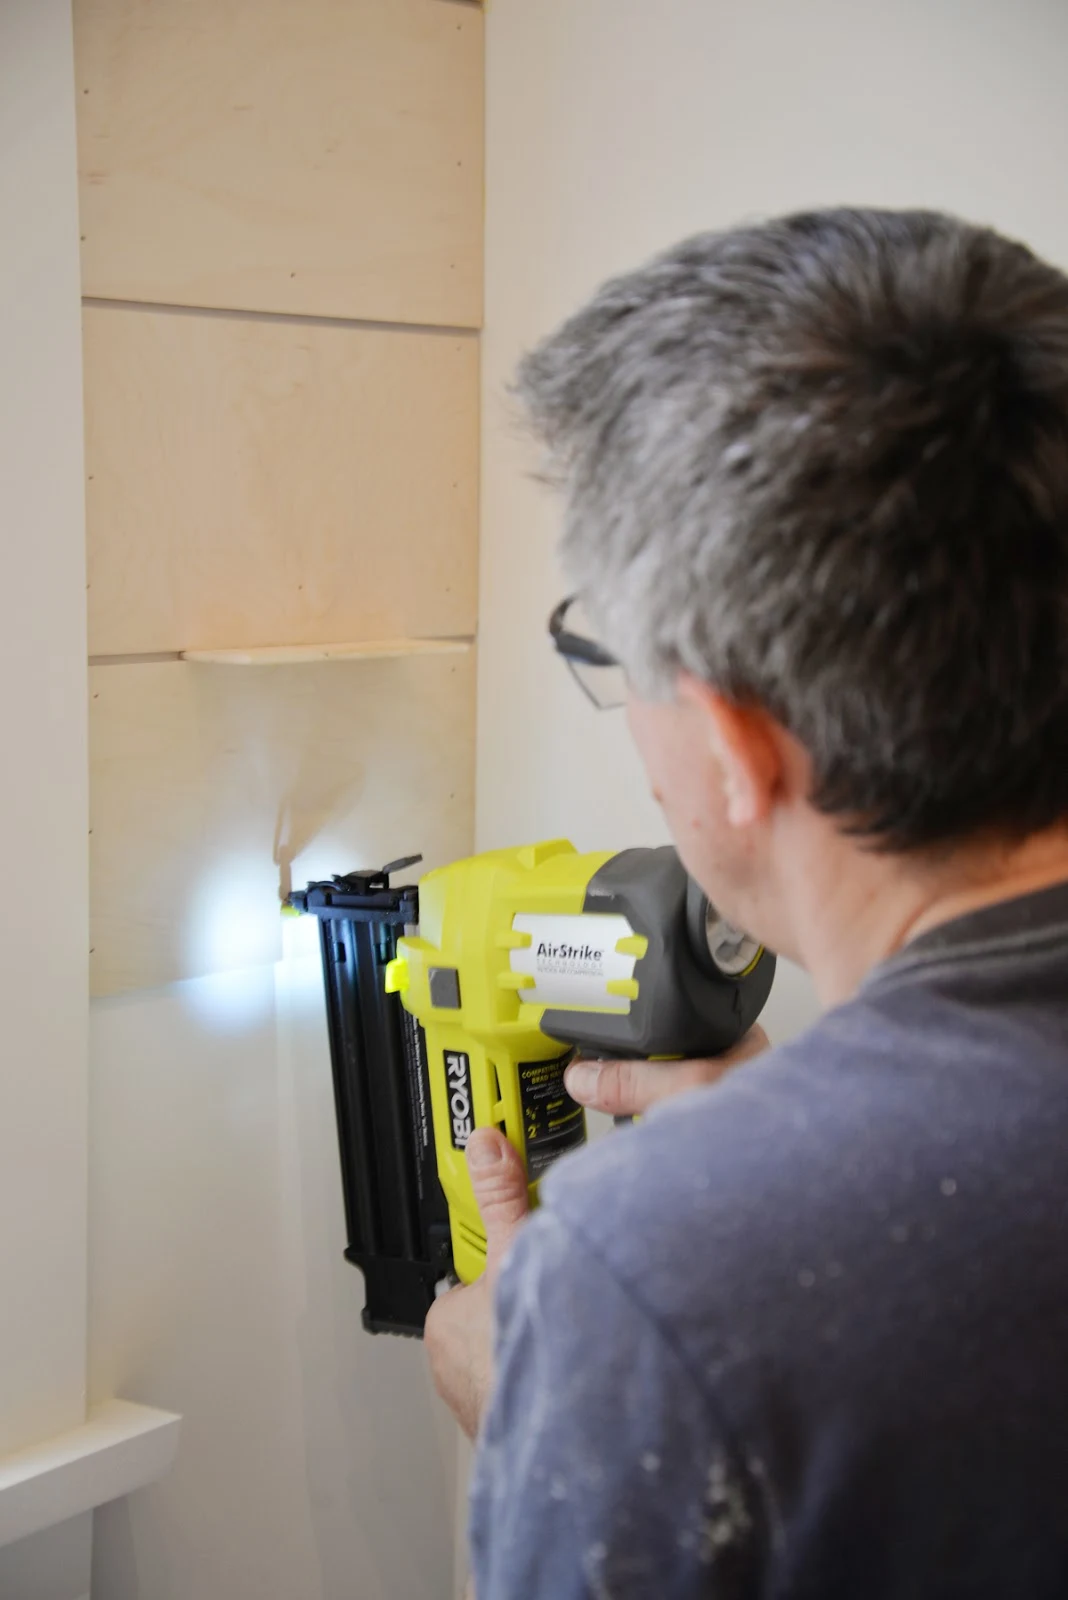 how to shiplap around doors, how to install a shiplap wall with a brad nailer, shiplap around windows